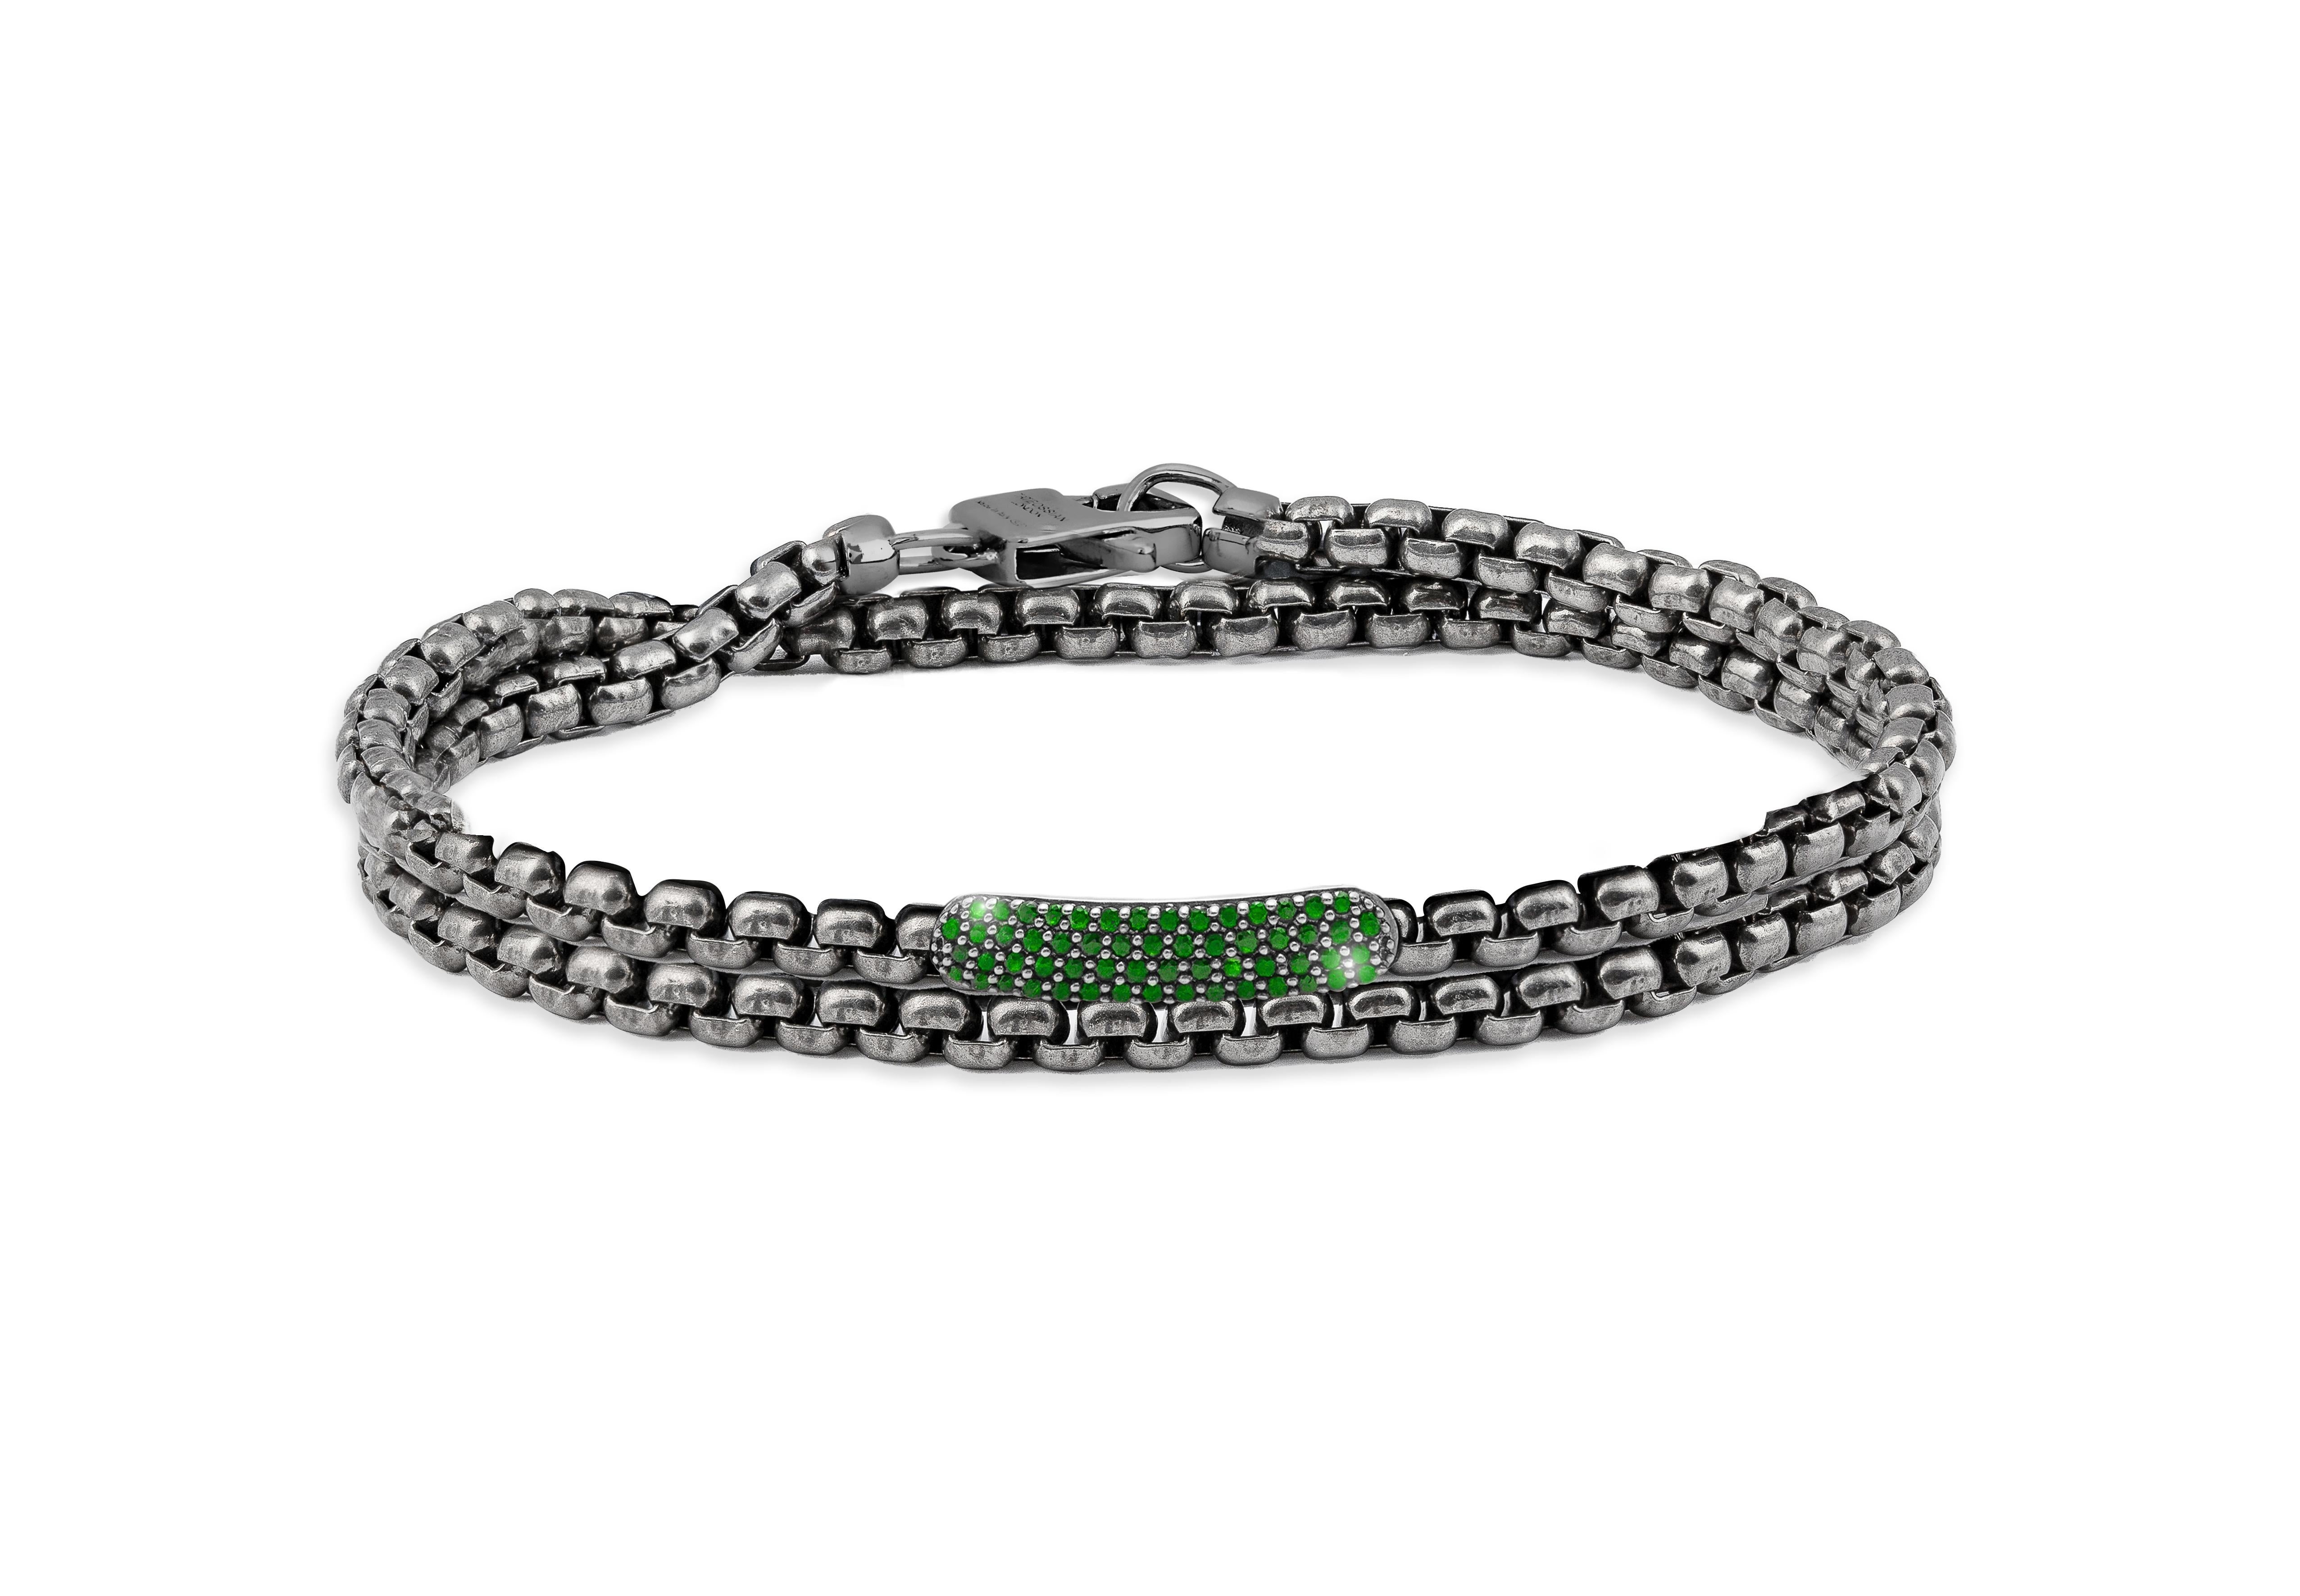 Black Rhodium Plated Sterling Silver Catena Baton Bracelet with Emeralds, Size M

The bracelets are handcrafted using carefully selected rare stones and feature a 0.34cts of black rhodium-plated sterling silver baton with sparkling green emeralds